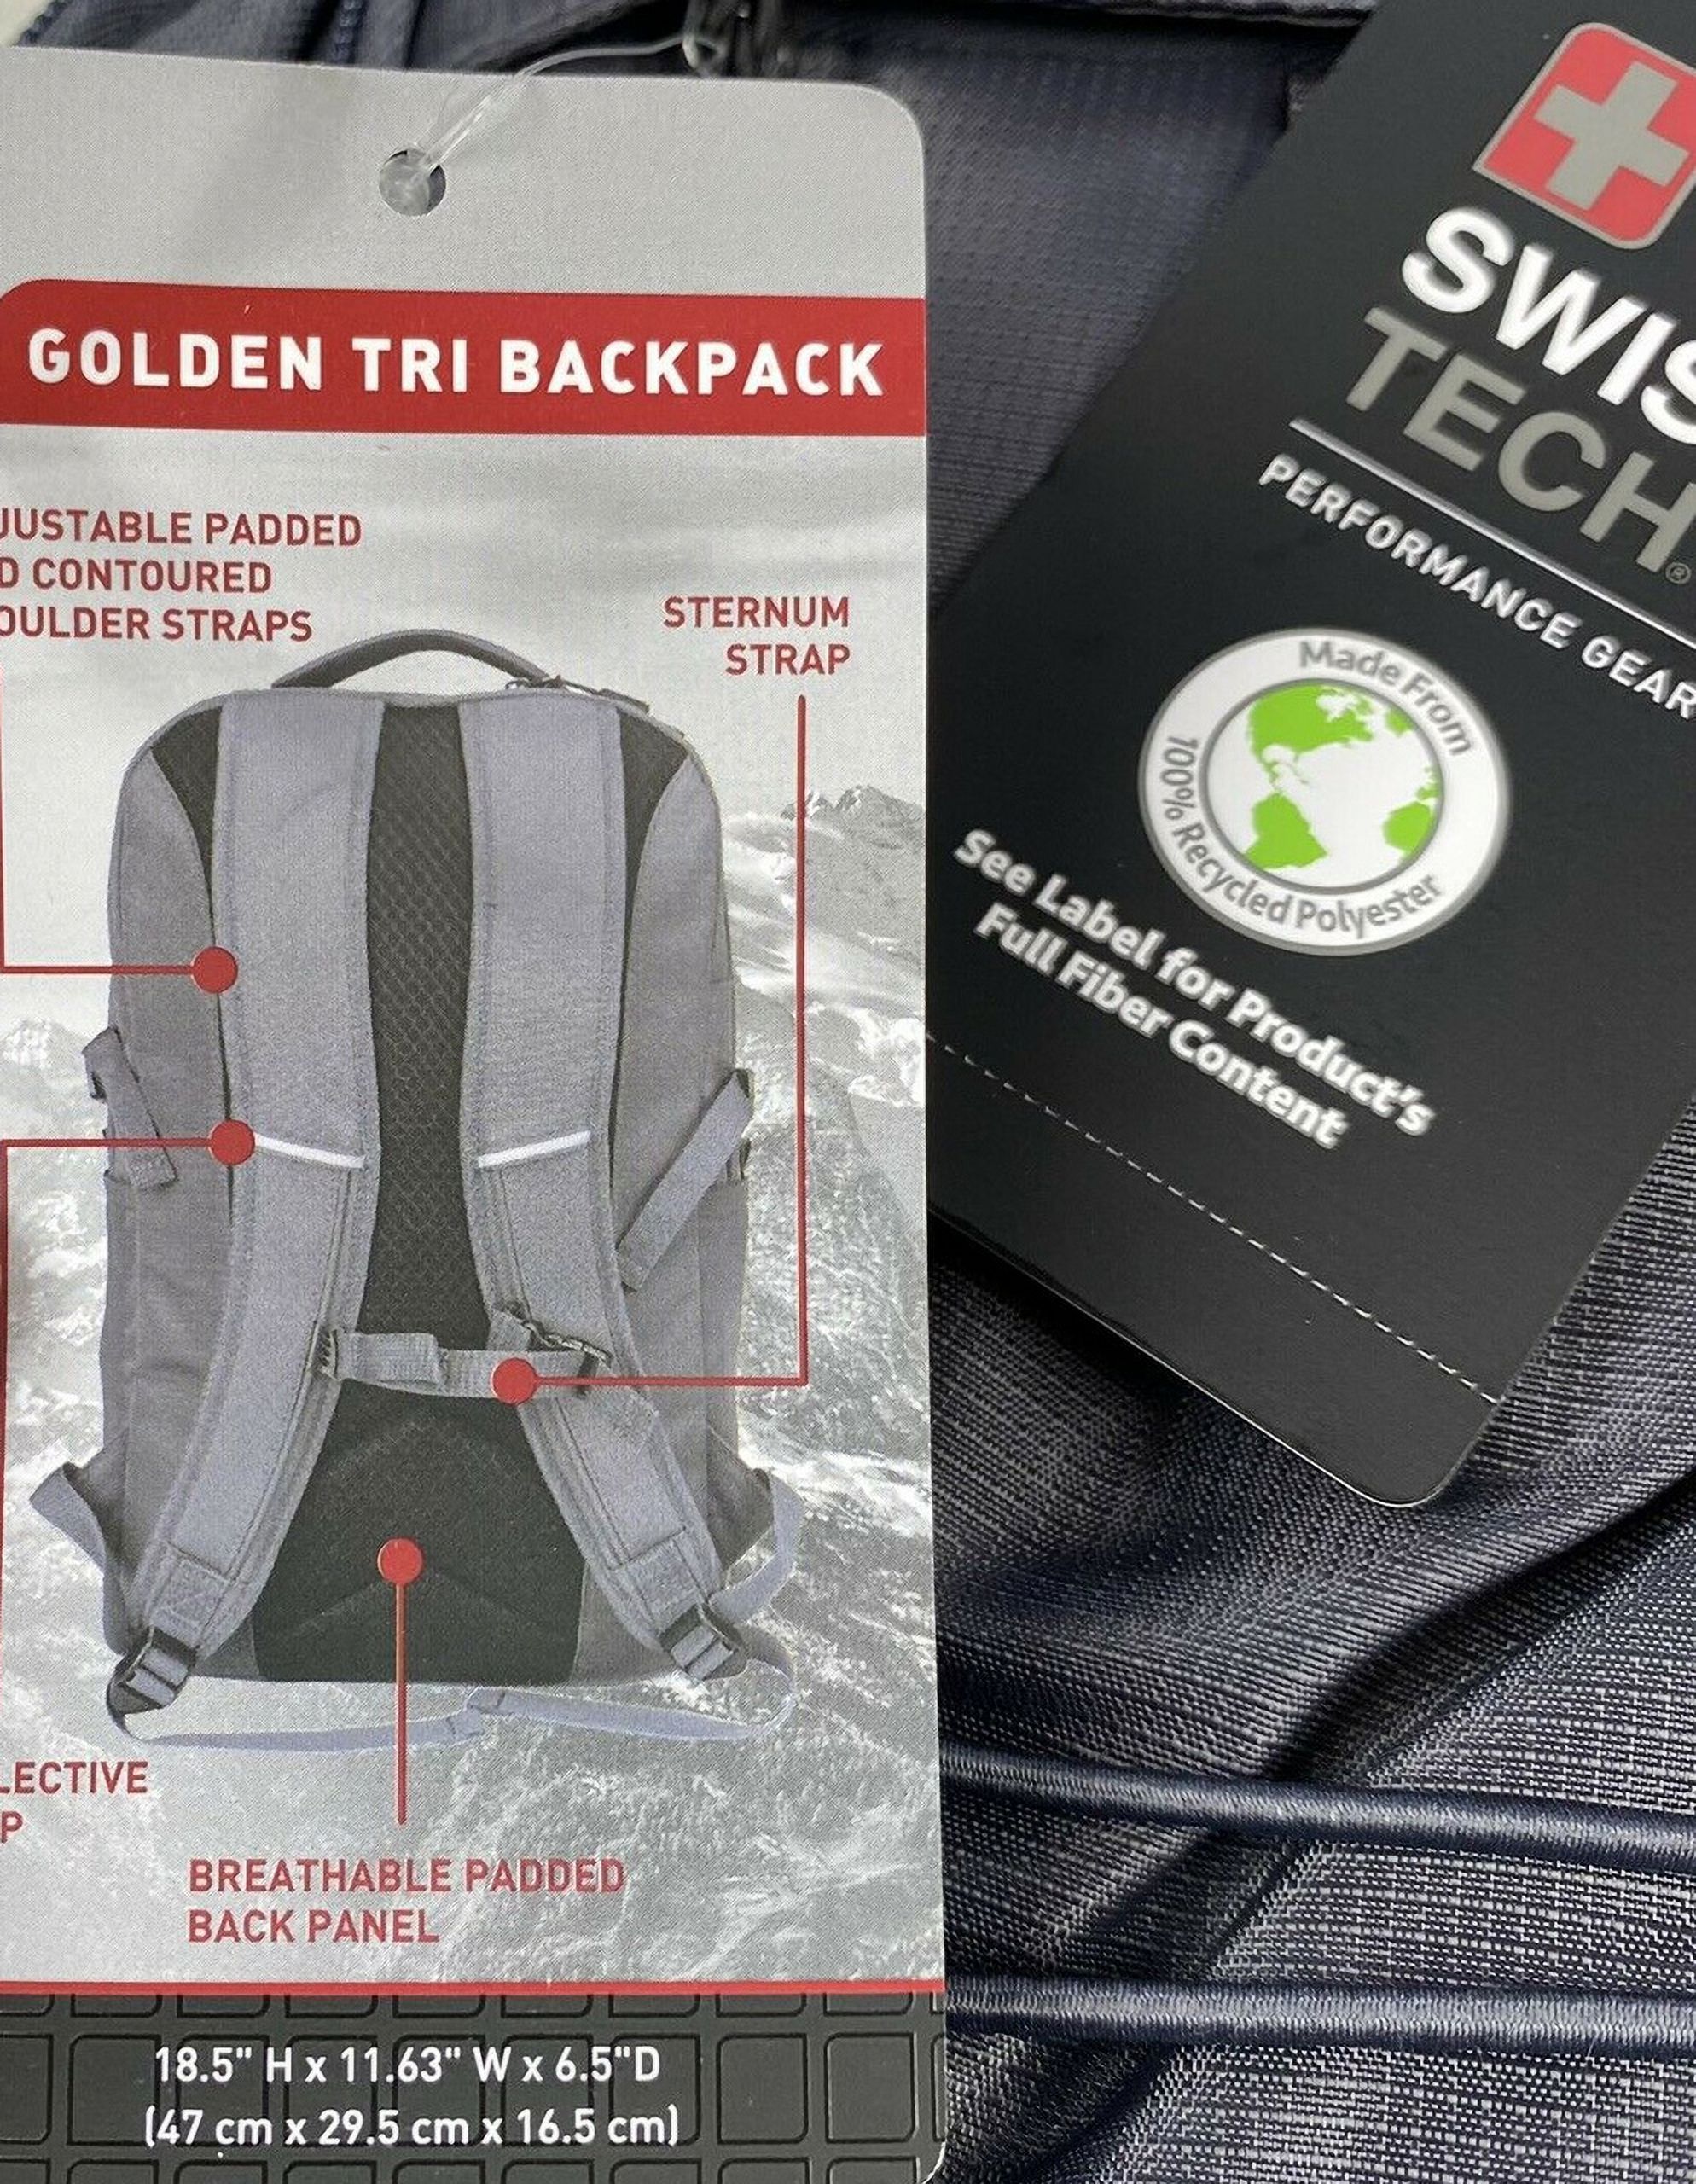 Swiss Tech Adult Unisex Golden Tri Charcoal Bungee Backpack - image 4 of 7